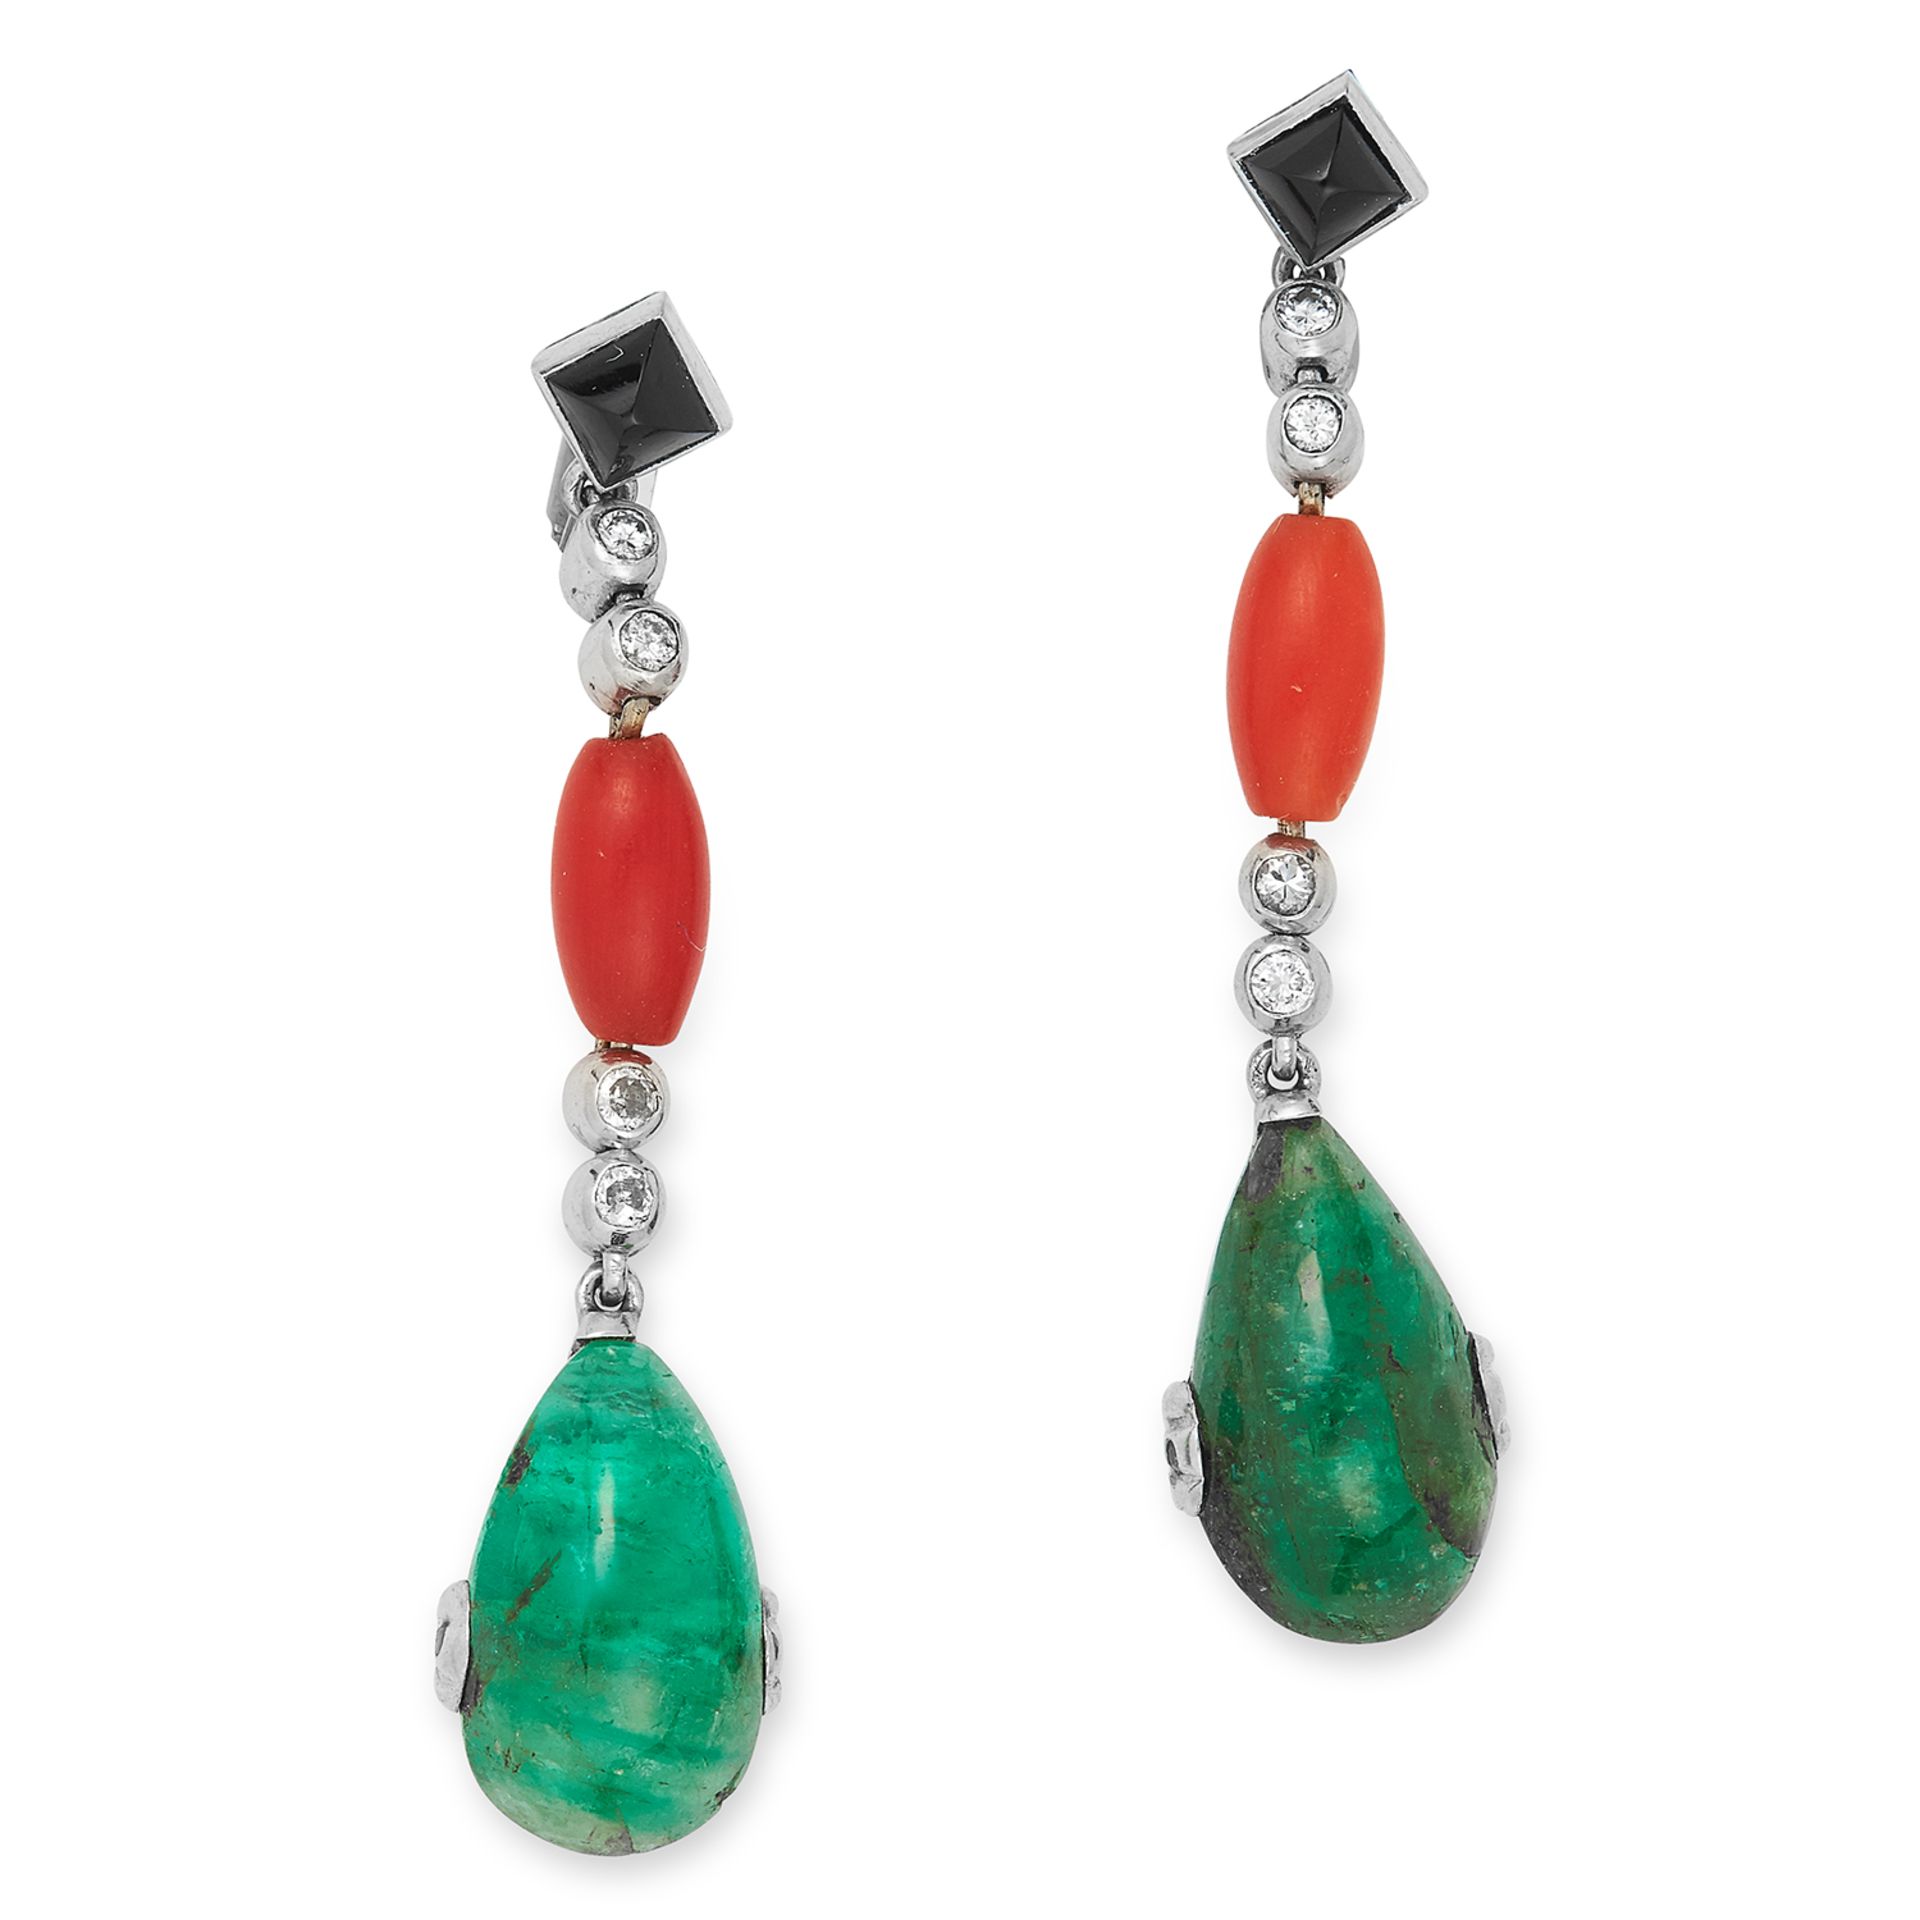 ANTIQUE ART DECO EMERALD, CORAL, ONYX AND DIAMOND EARRINGS each set with polished onyx, coral, round